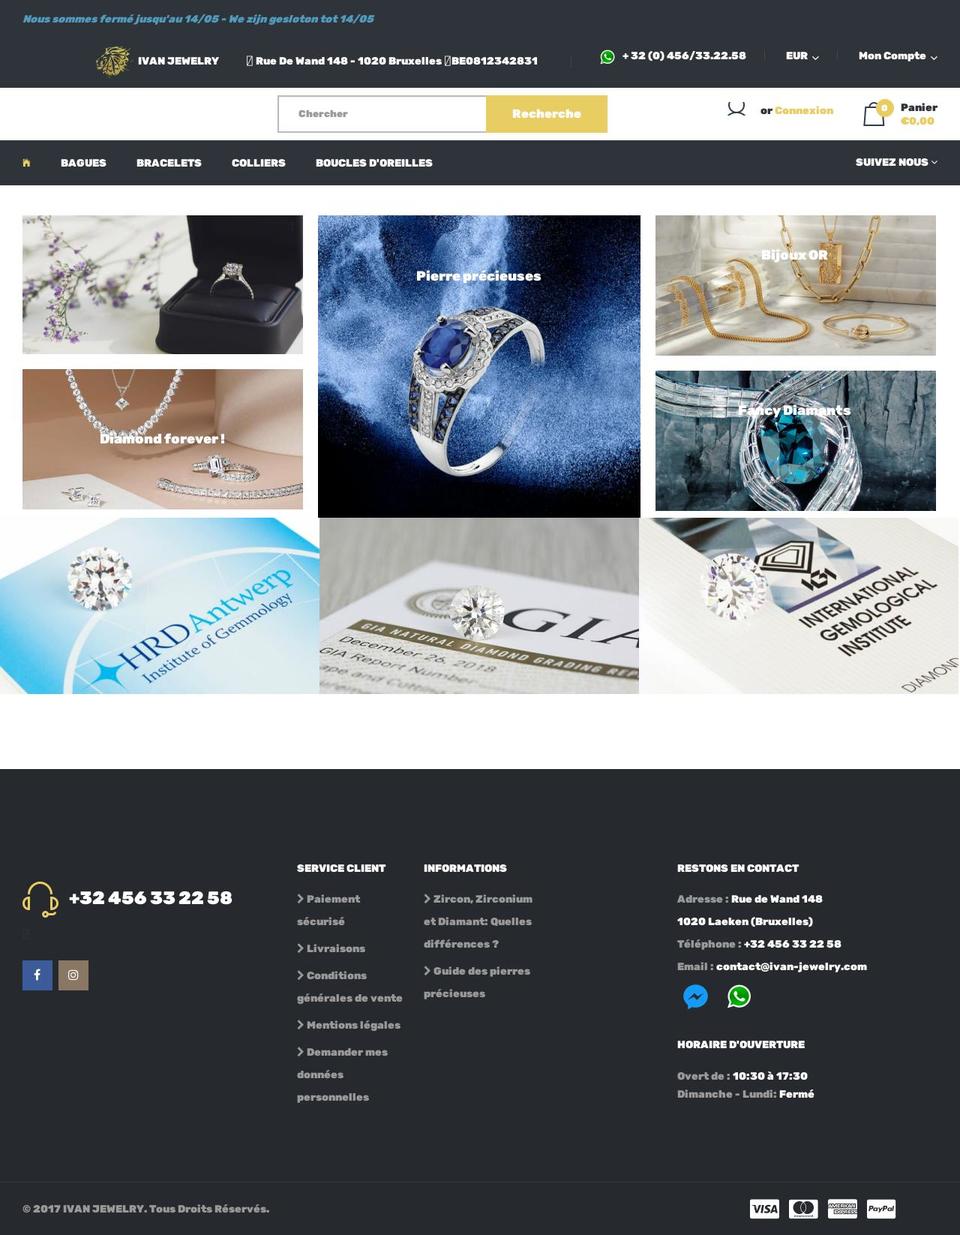 Sneaker Shopify theme site example ivan-jewelry.com